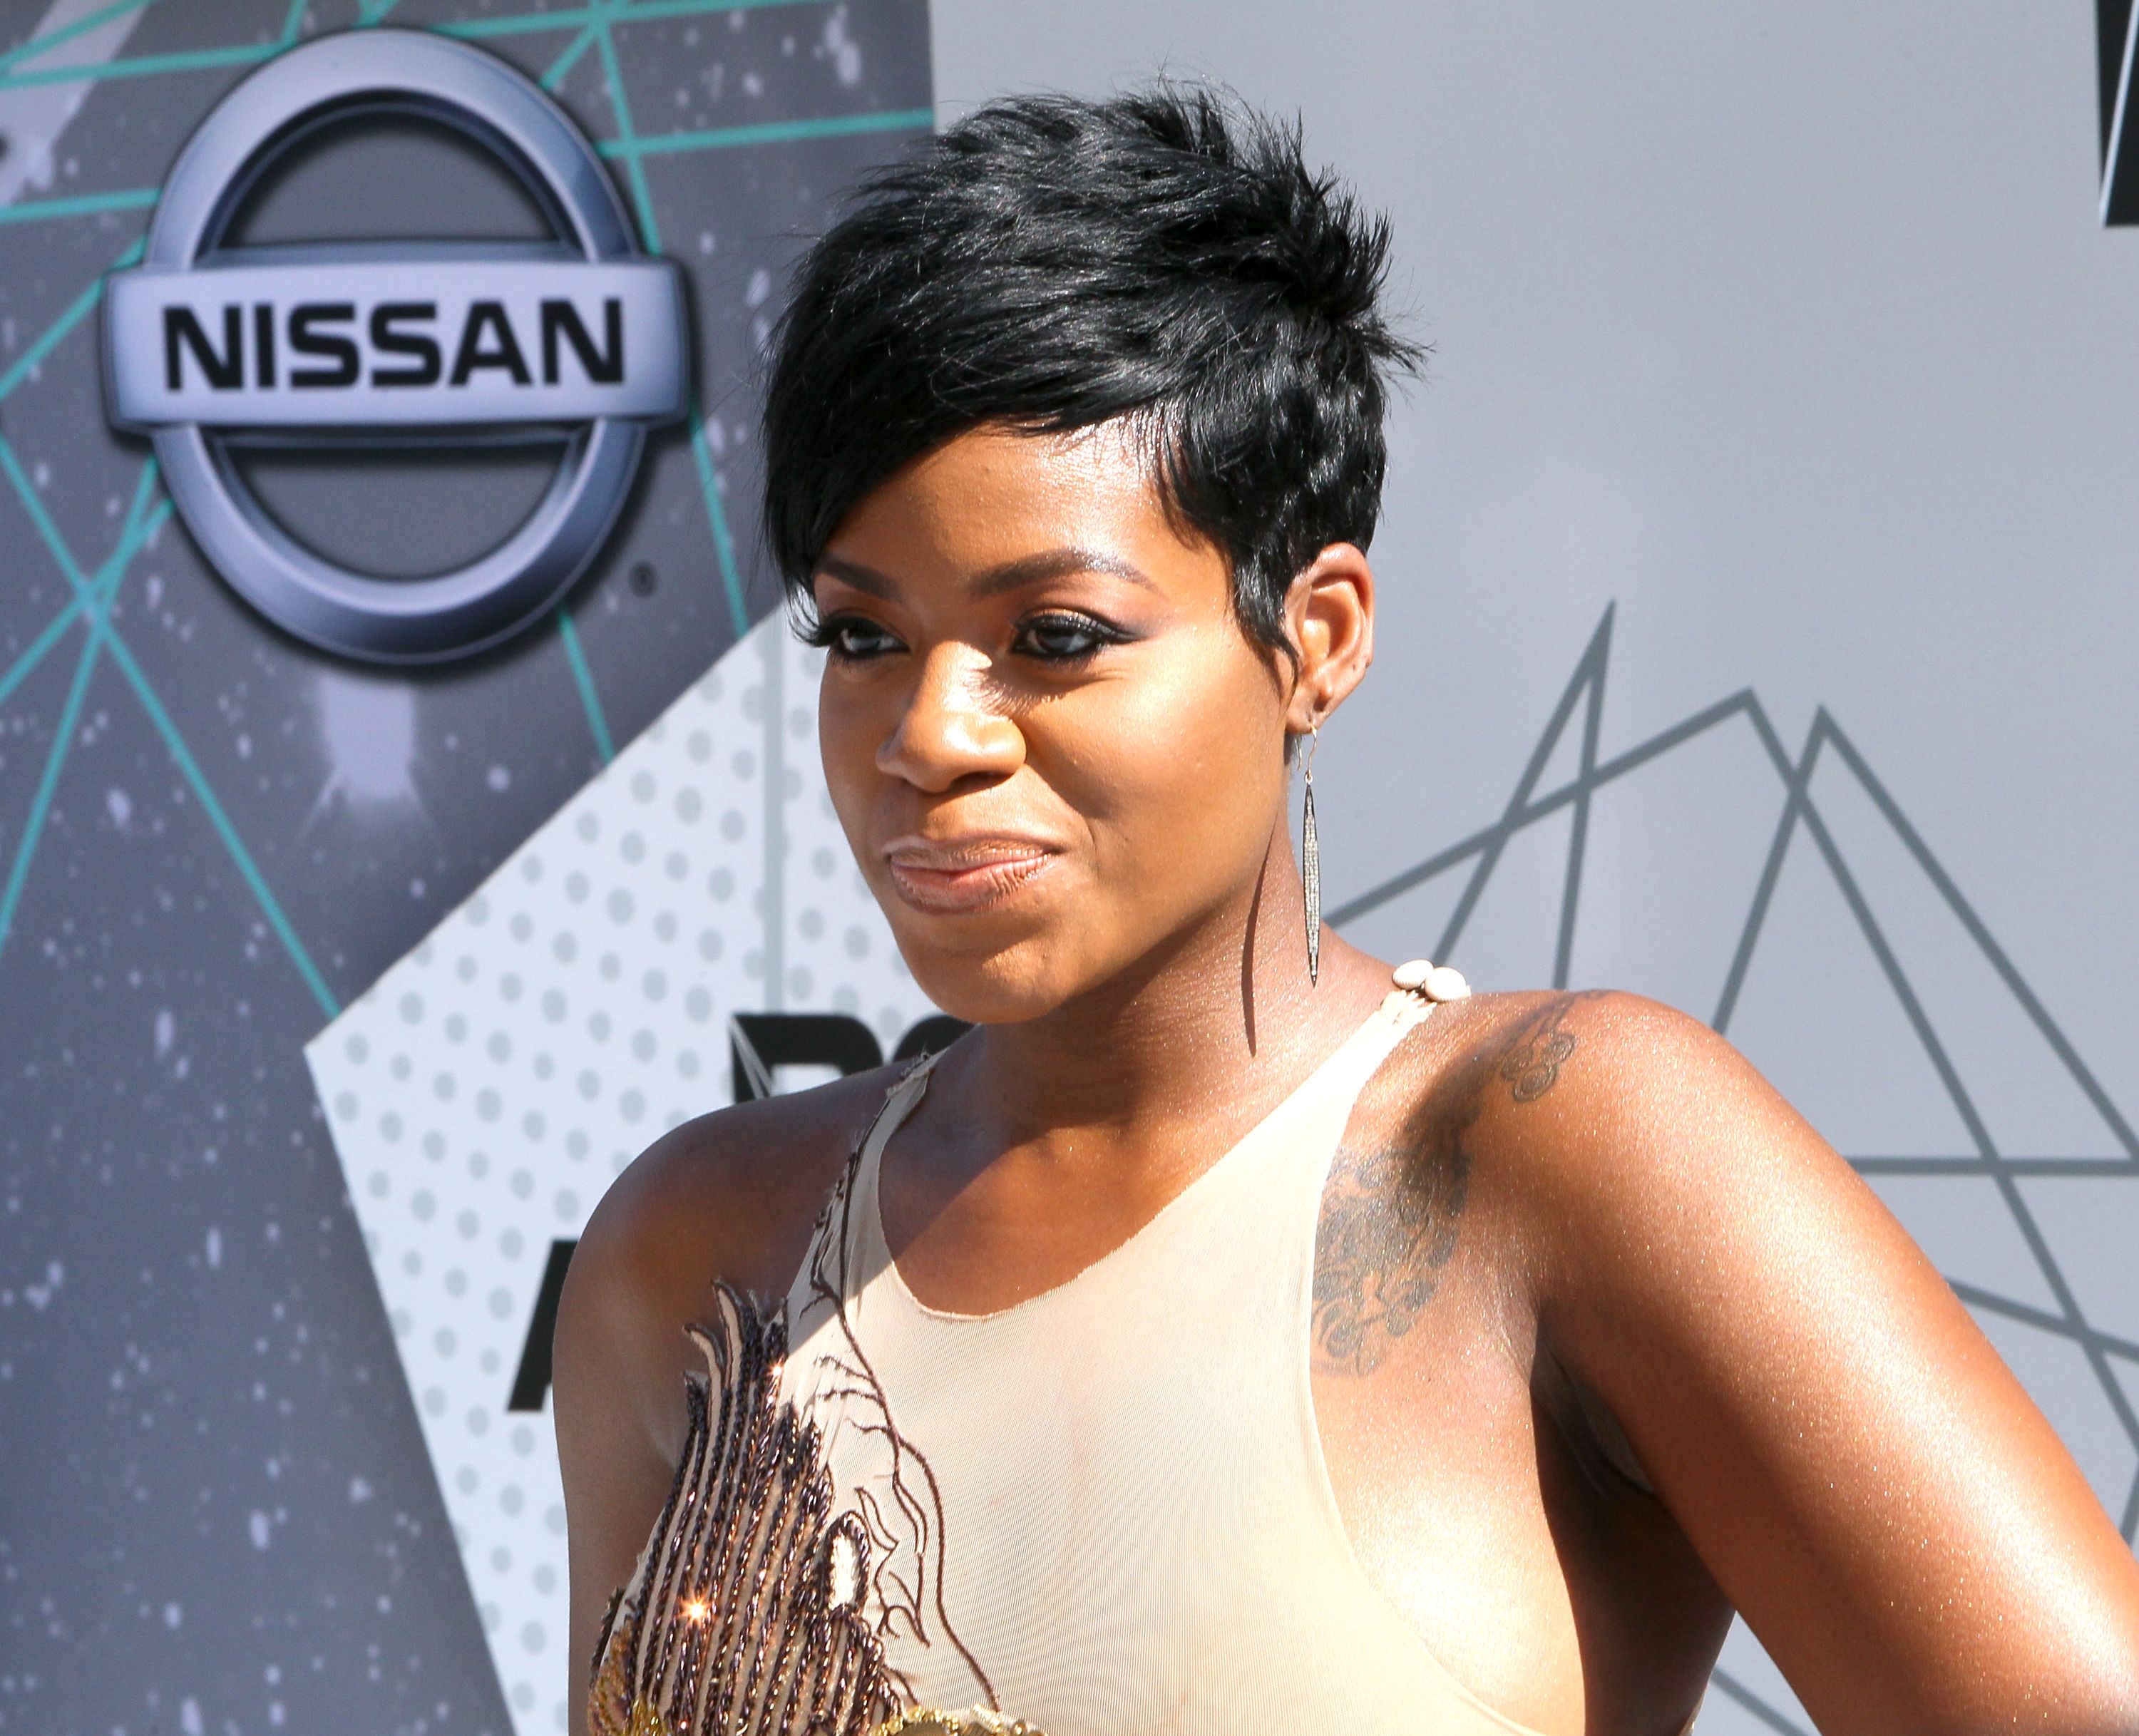 Singer Fantasia Barrino attends the 2016 BET Awards at Microsoft Theater on June 26, 2016. | Photo: Getty Images